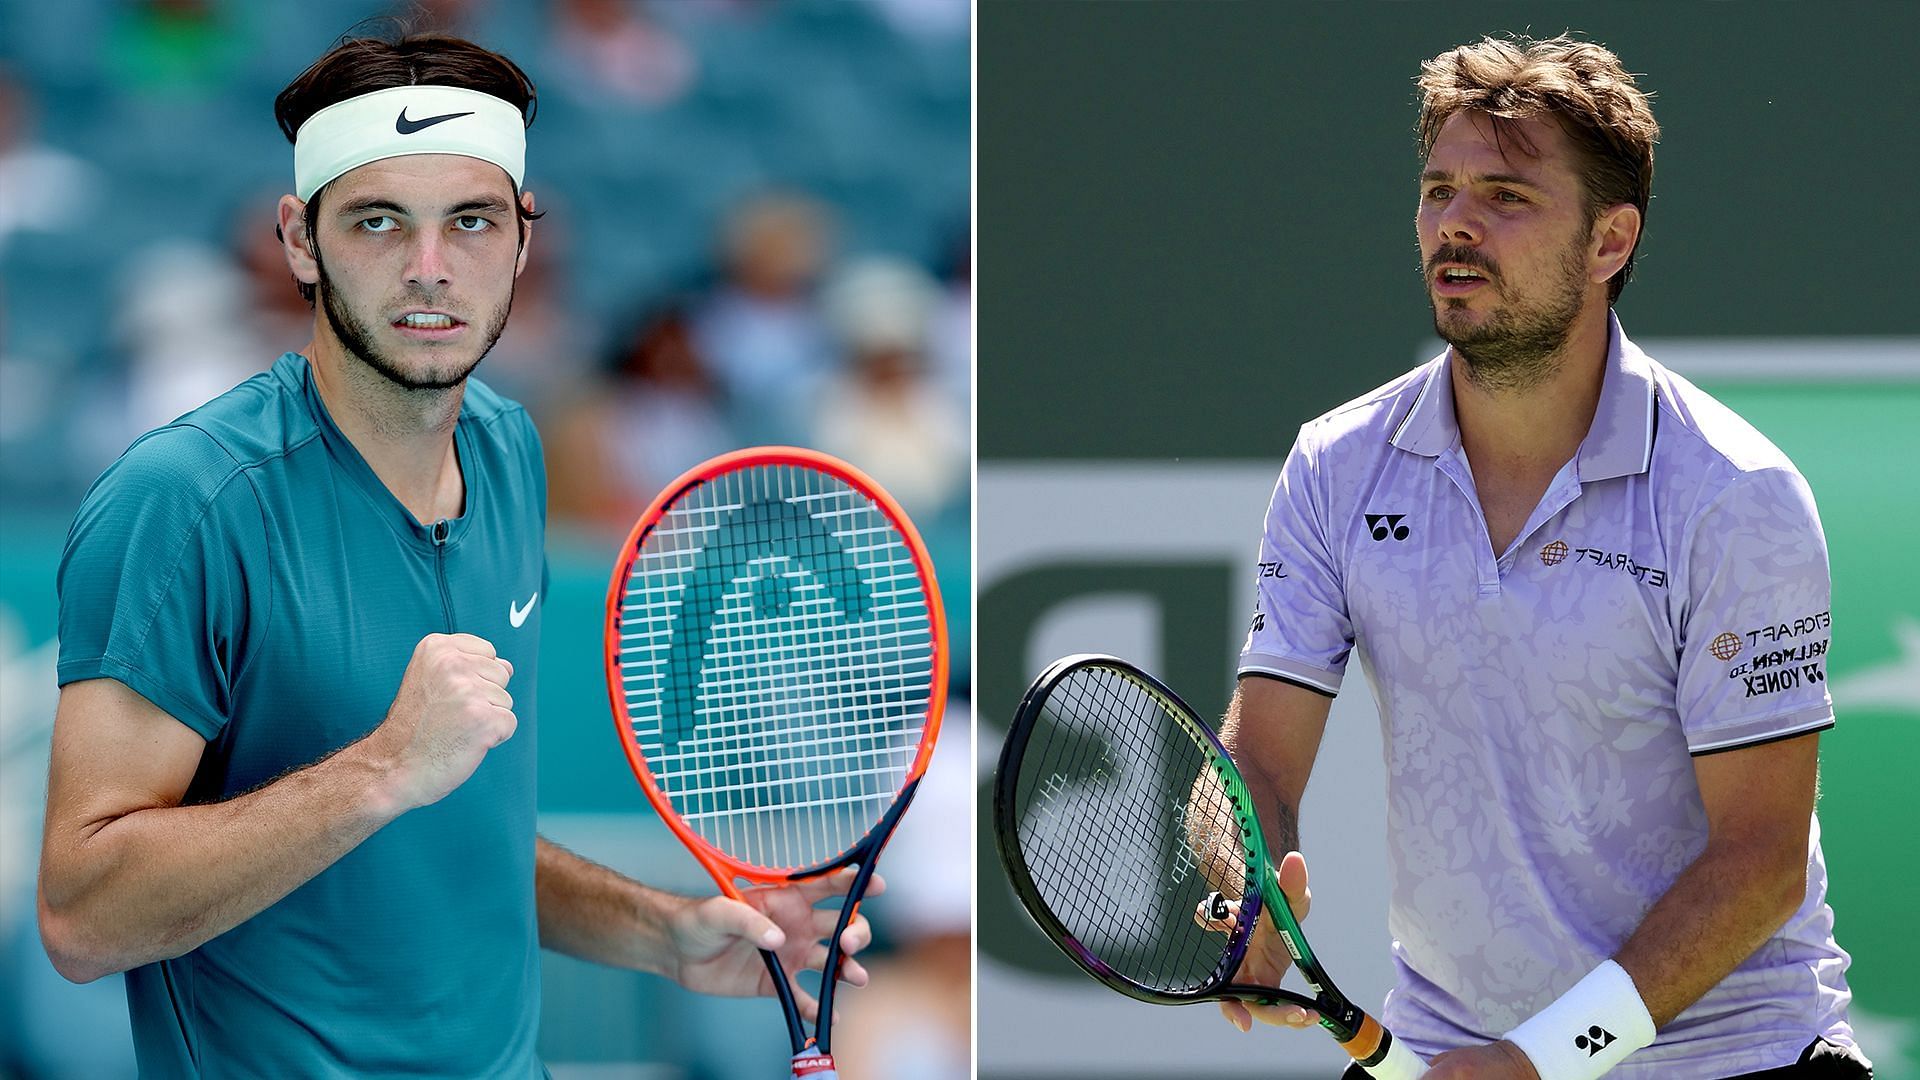 Monte-Carlo Masters 2023 Taylor Fritz vs Stan Wawrinka preview, head-to-head, prediction, odds and pick